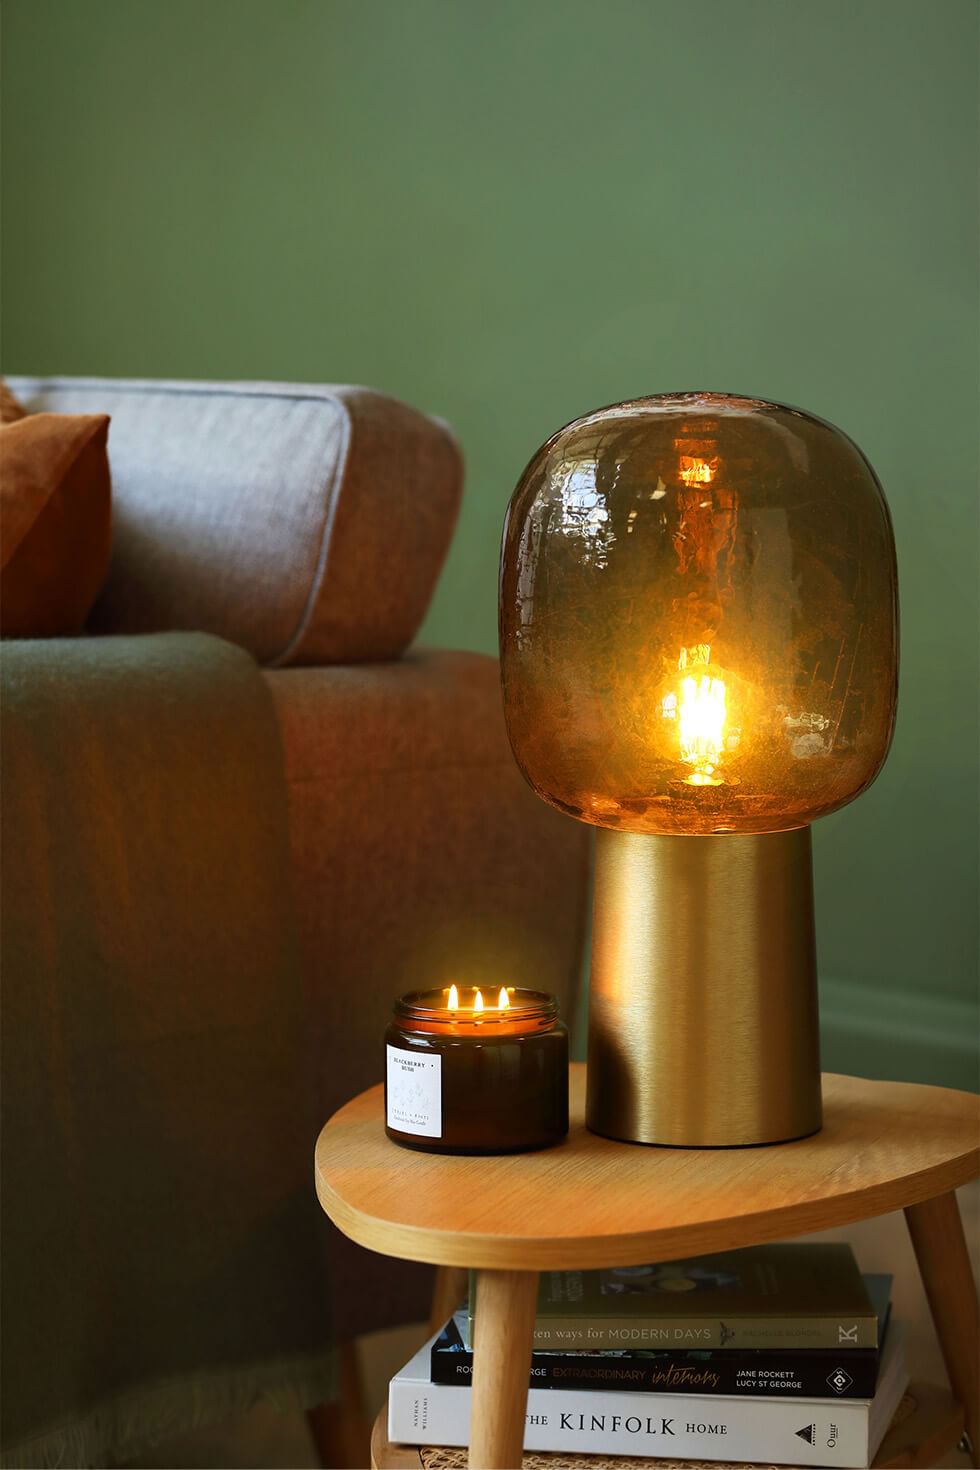 Stylish table lamp casting a warm glow